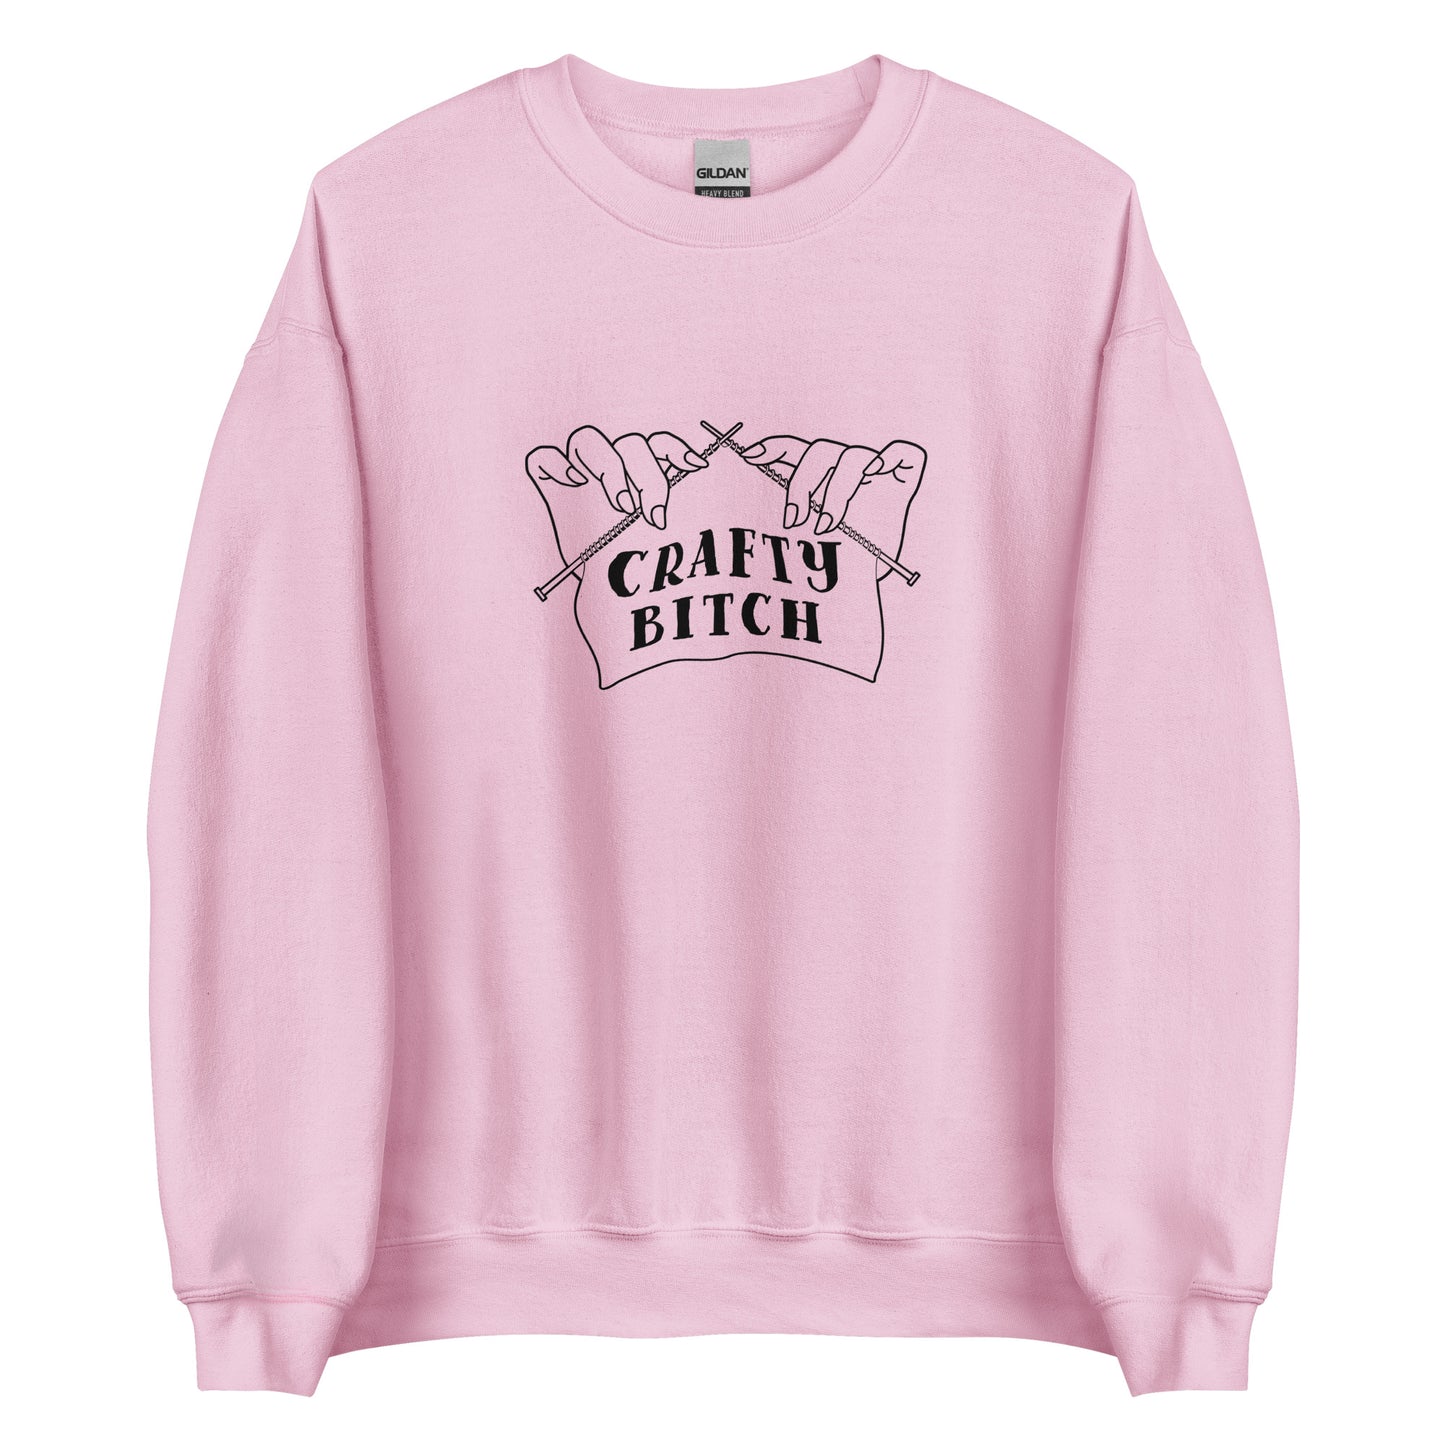 A light pink crewneck sweatshirt featuring a single-color illustration of a pair of hands holding knitting needles. Fabric on the needles features text that reads "crafty bitch".